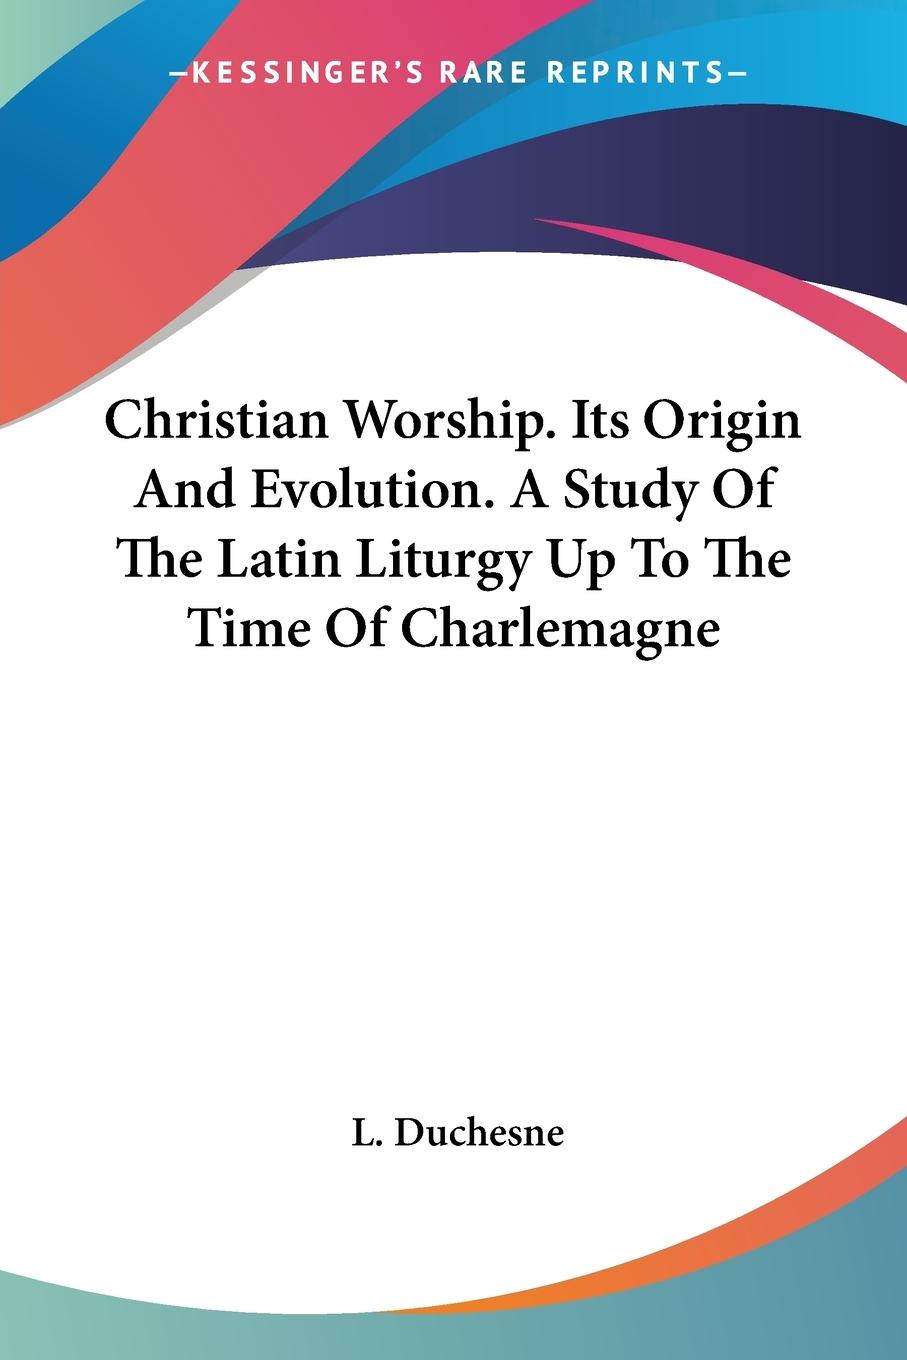 Christian Worship. Its Origin And Evolution. A Study Of The Latin Liturgy Up To The Time Of Charlemagne - Duchesne, L.